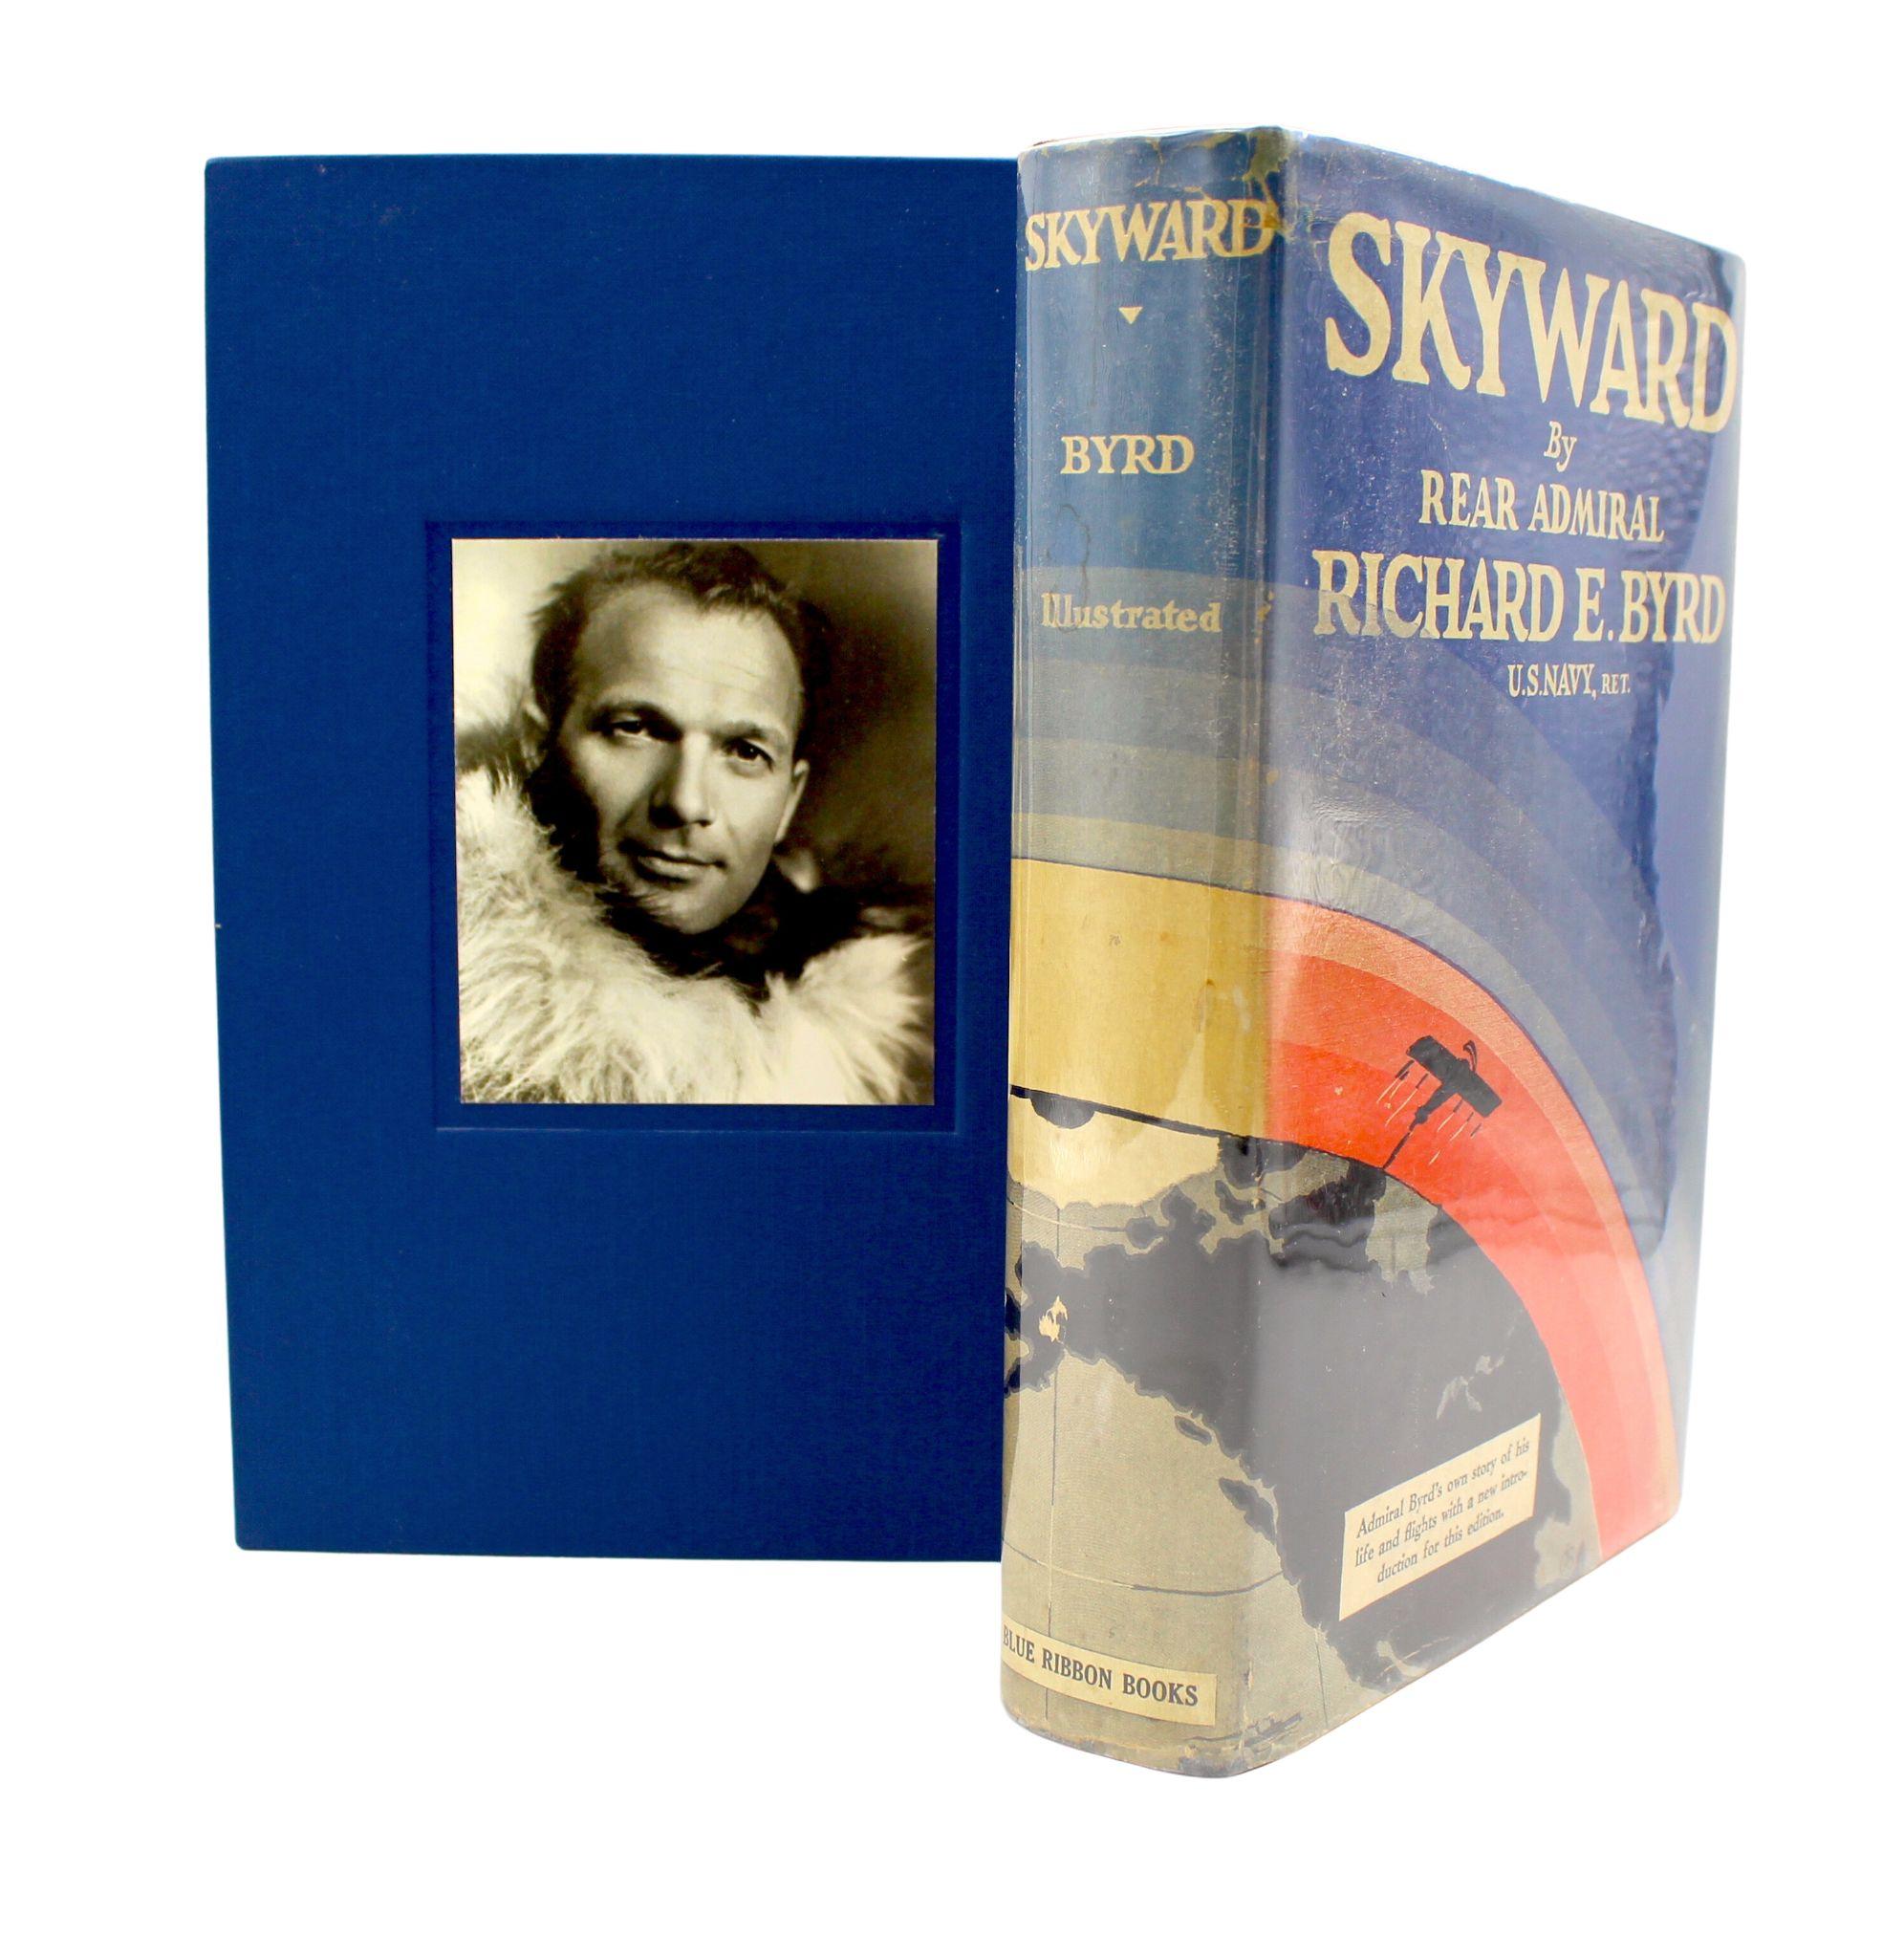 Byrd, Richard E. Skyward. New York: Blue Ribbon Books, 1931. Octavo. First edition, eleventh printing. In original hardcover boards and original pictorial dust jacket. Presented in a new archival slipcase. 

This is a 1931 first edition, eleventh